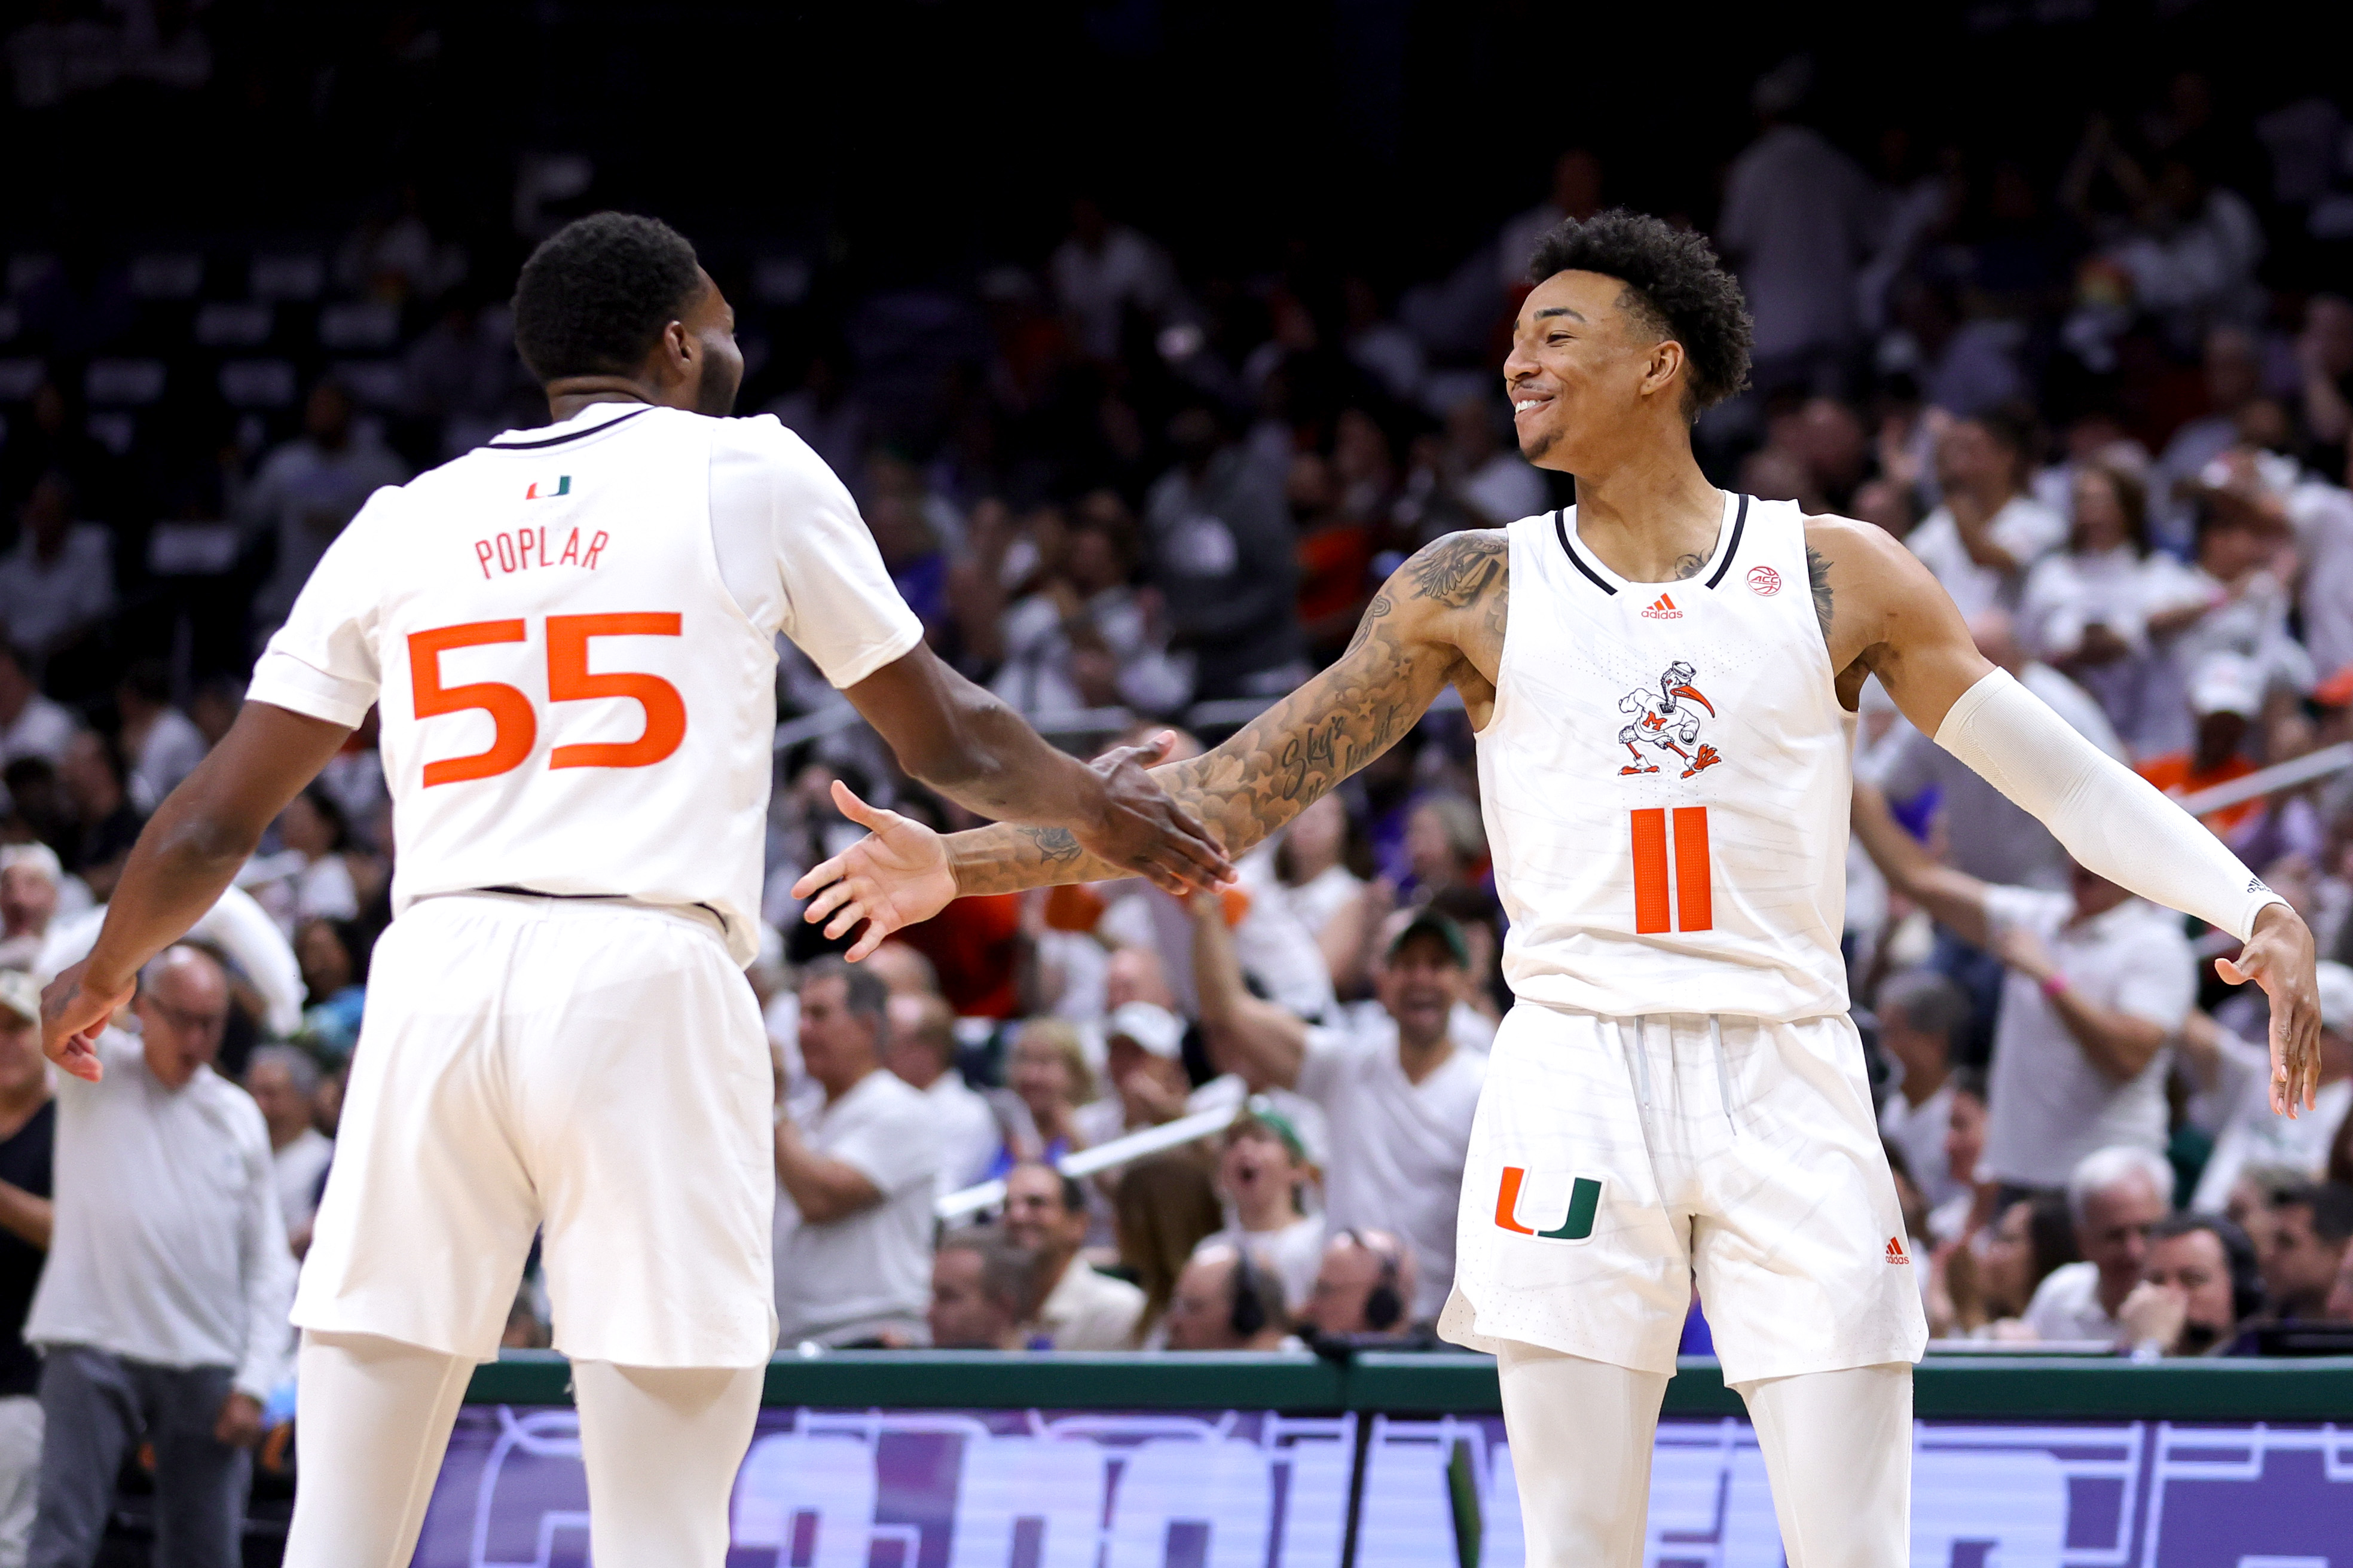 Miami beats Wake Forest in ACC tournament semifinal, to play for title